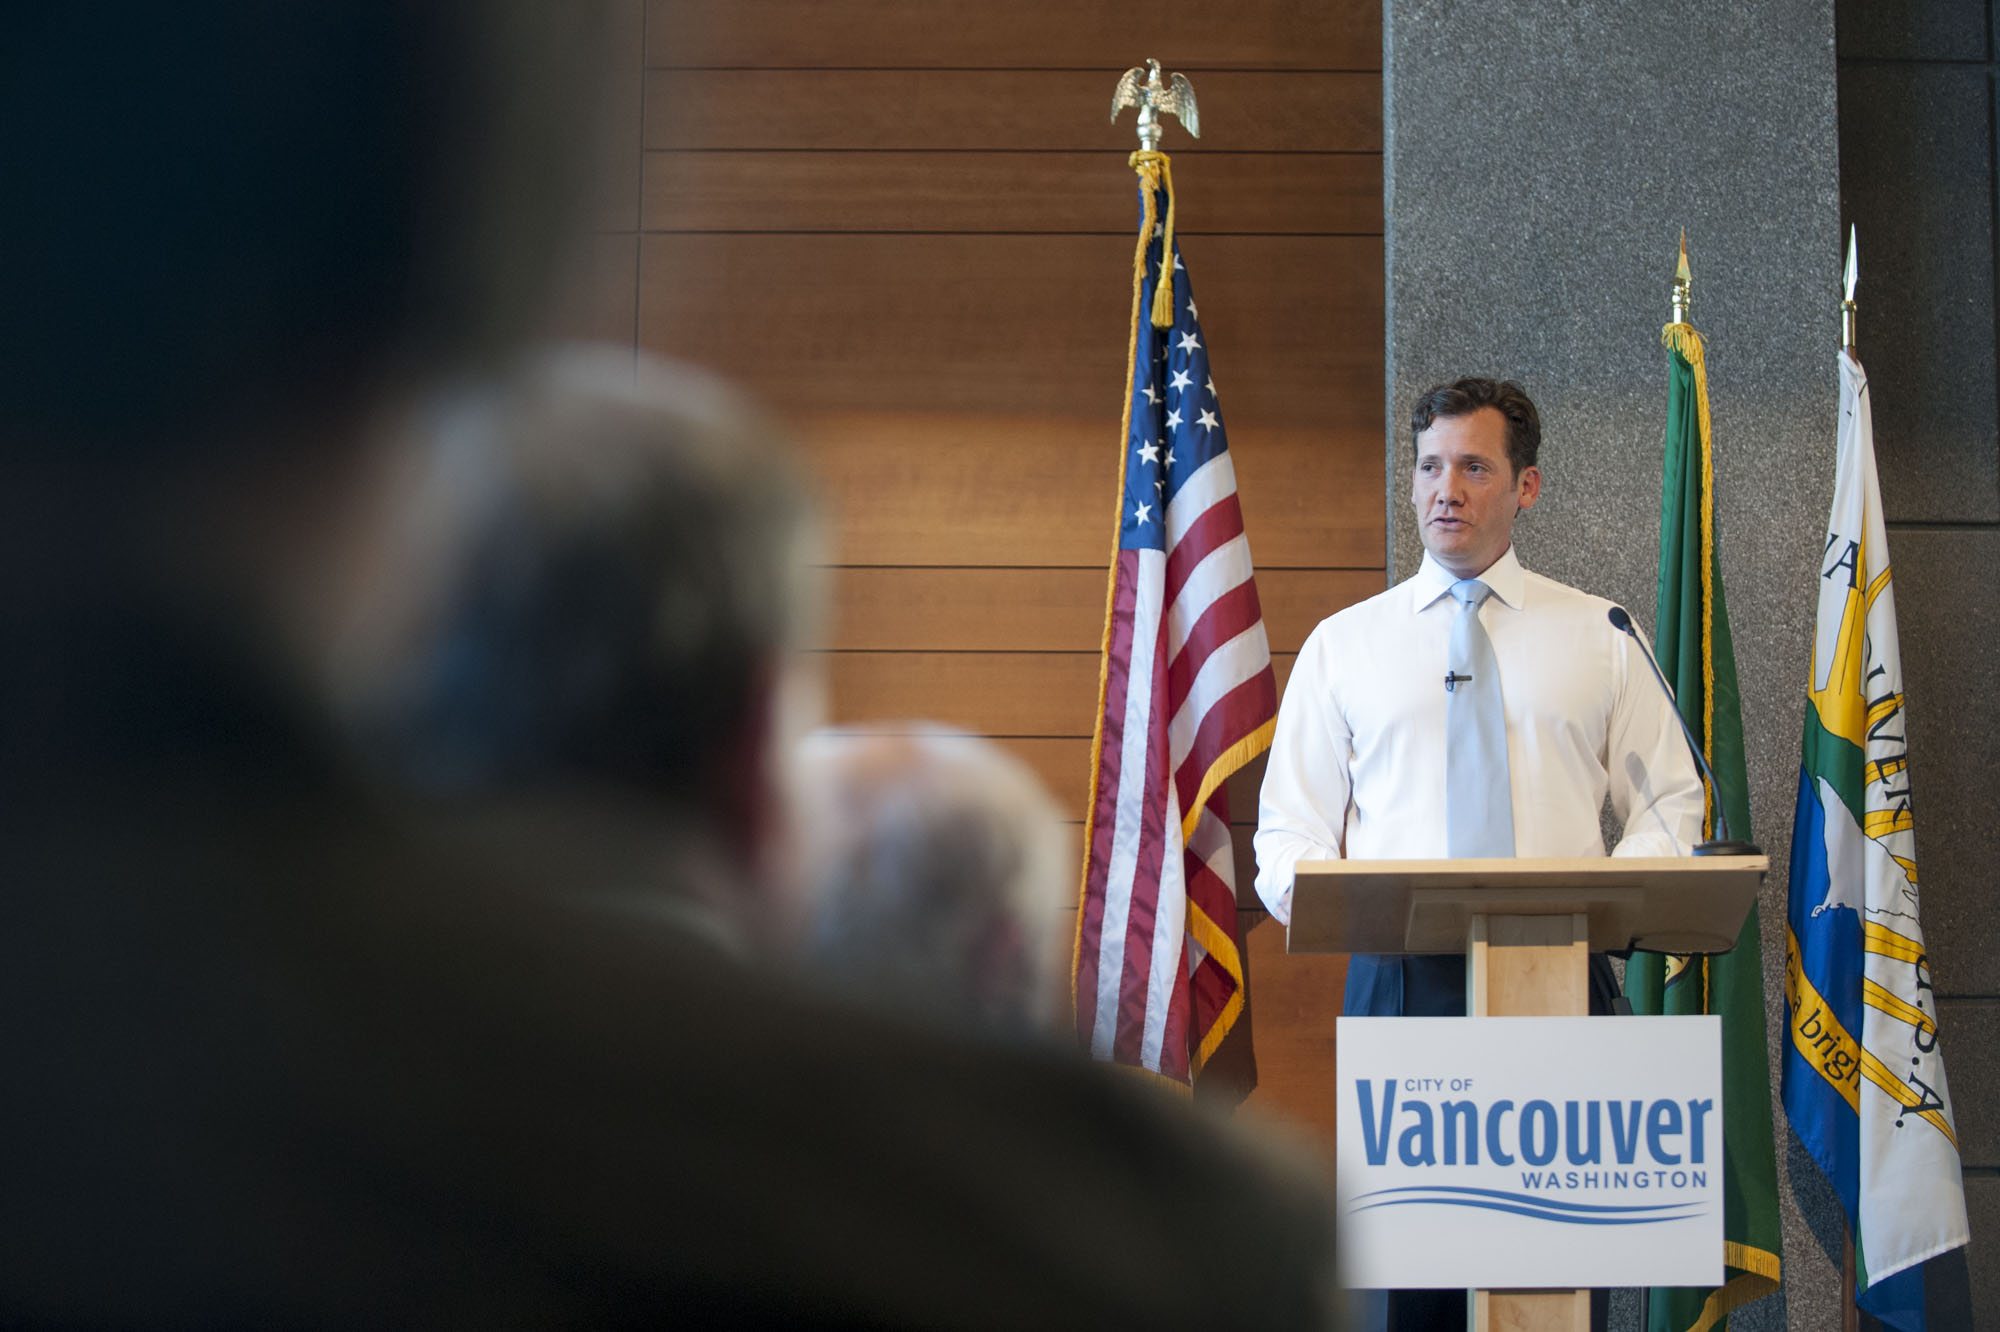 Vancouver Mayor Tim Leavitt delivers his annual State of the City speech in March. Leavitt said Sunday that he fell victim to a vehicle prowl over the weekend while he was in Portland visiting a friend.